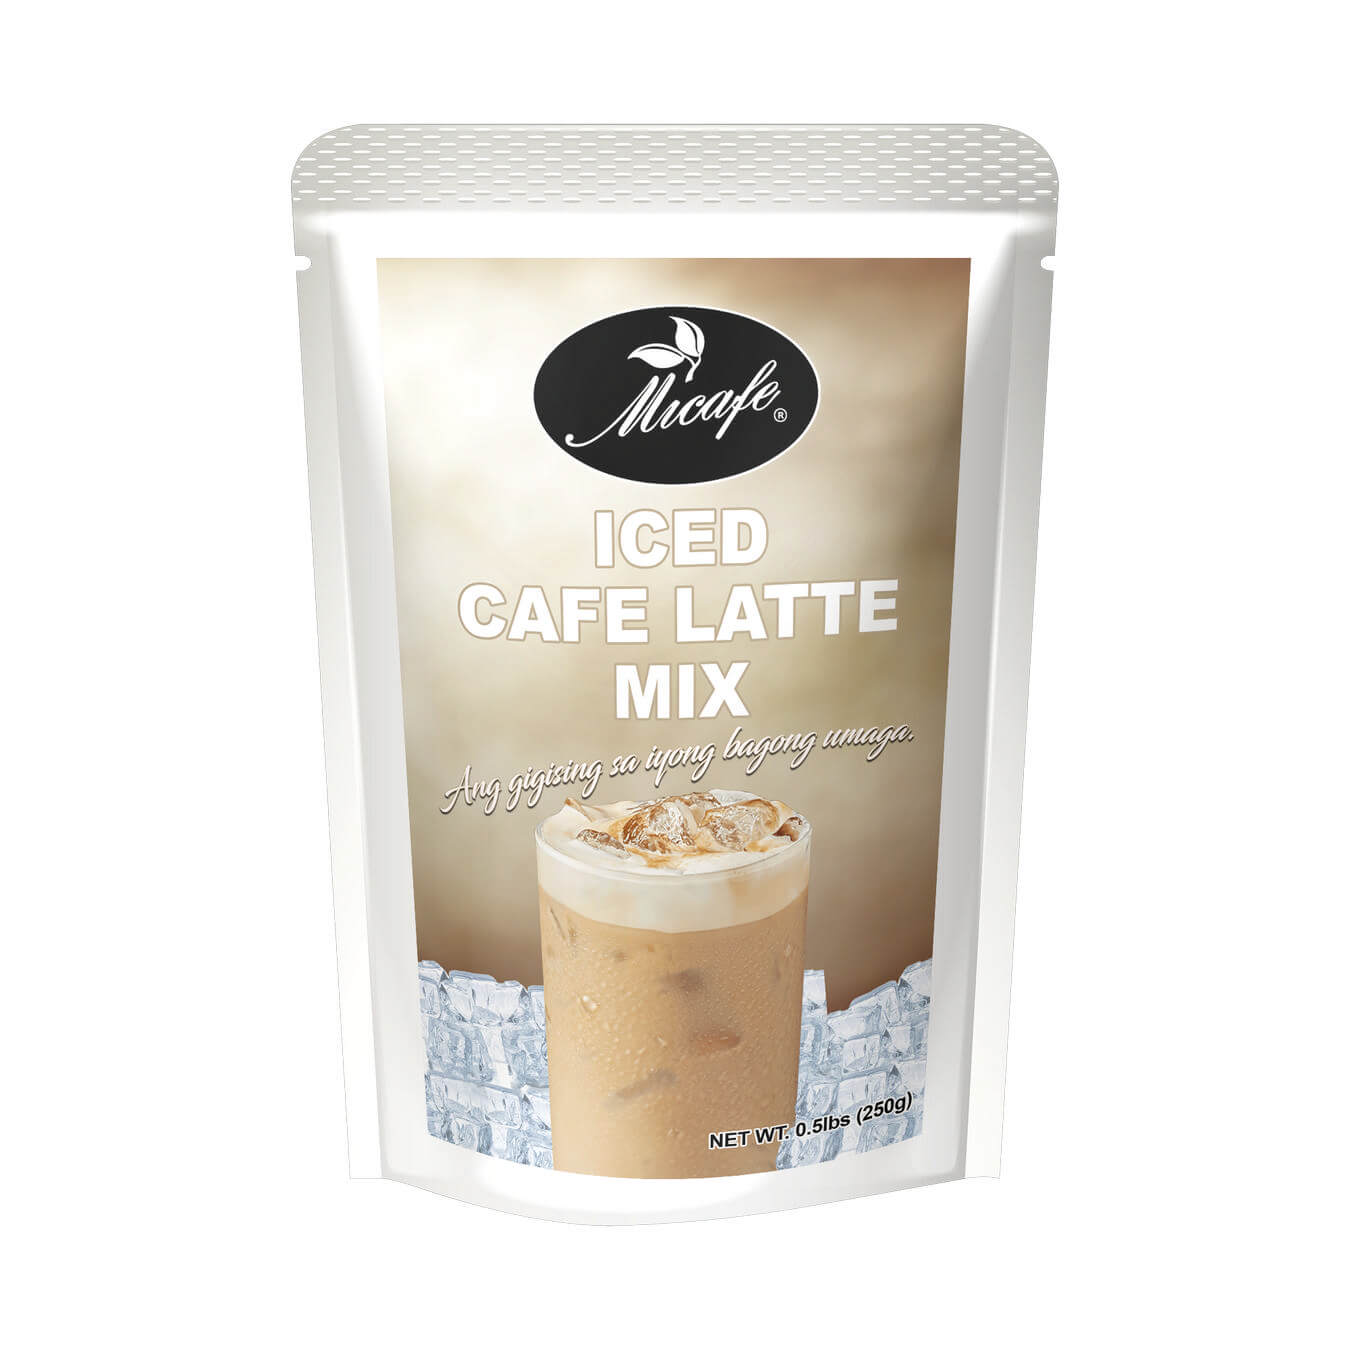 Iced Cafe Latte Mix